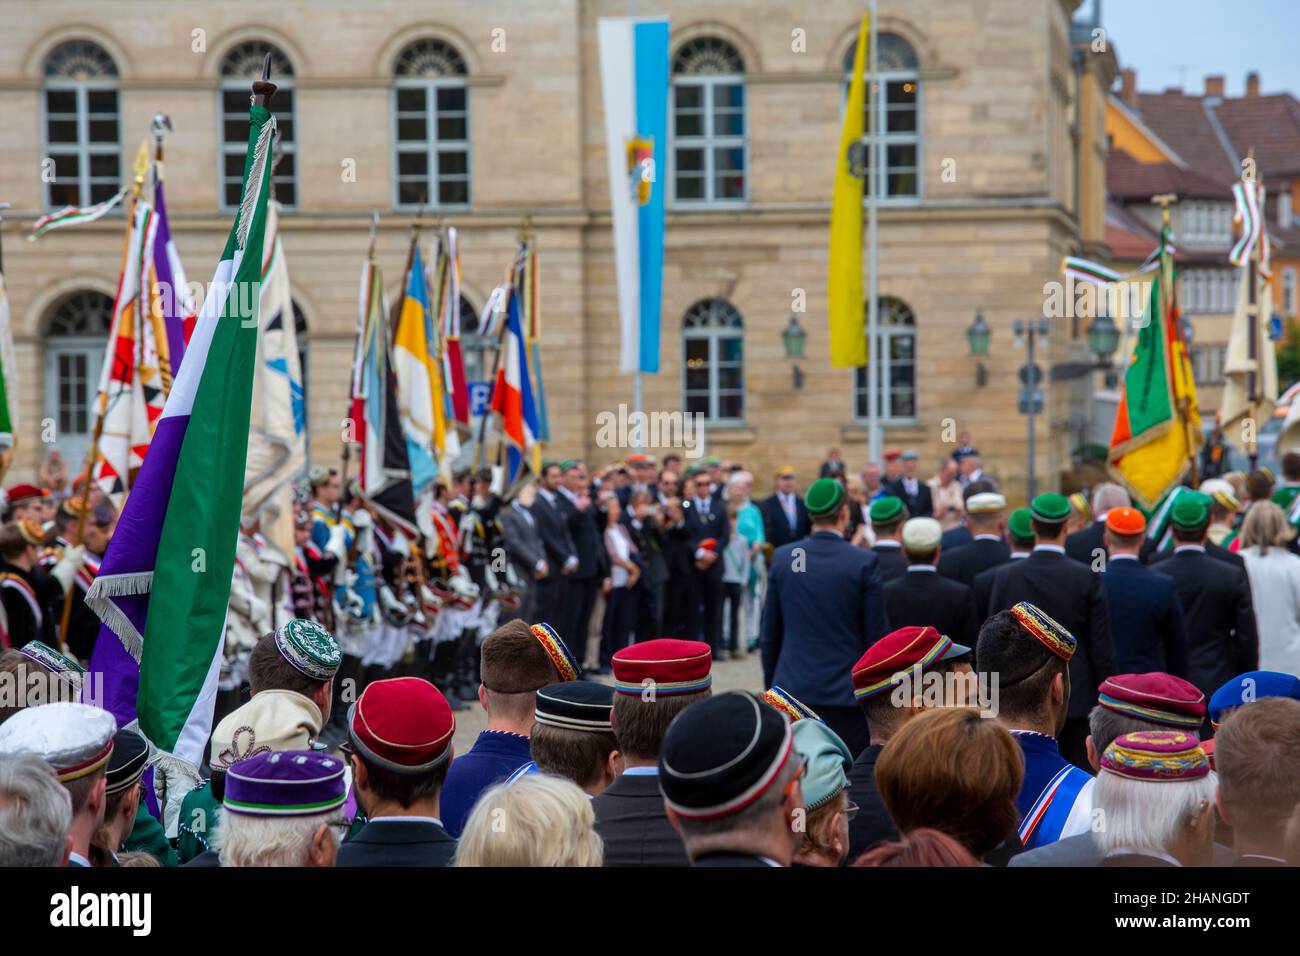 Members of traditional student associations enter Schlossplatz in Coburg, Germany today. The 151st Coburg Covent is underway this weekend in Coburg. T Stock Photo